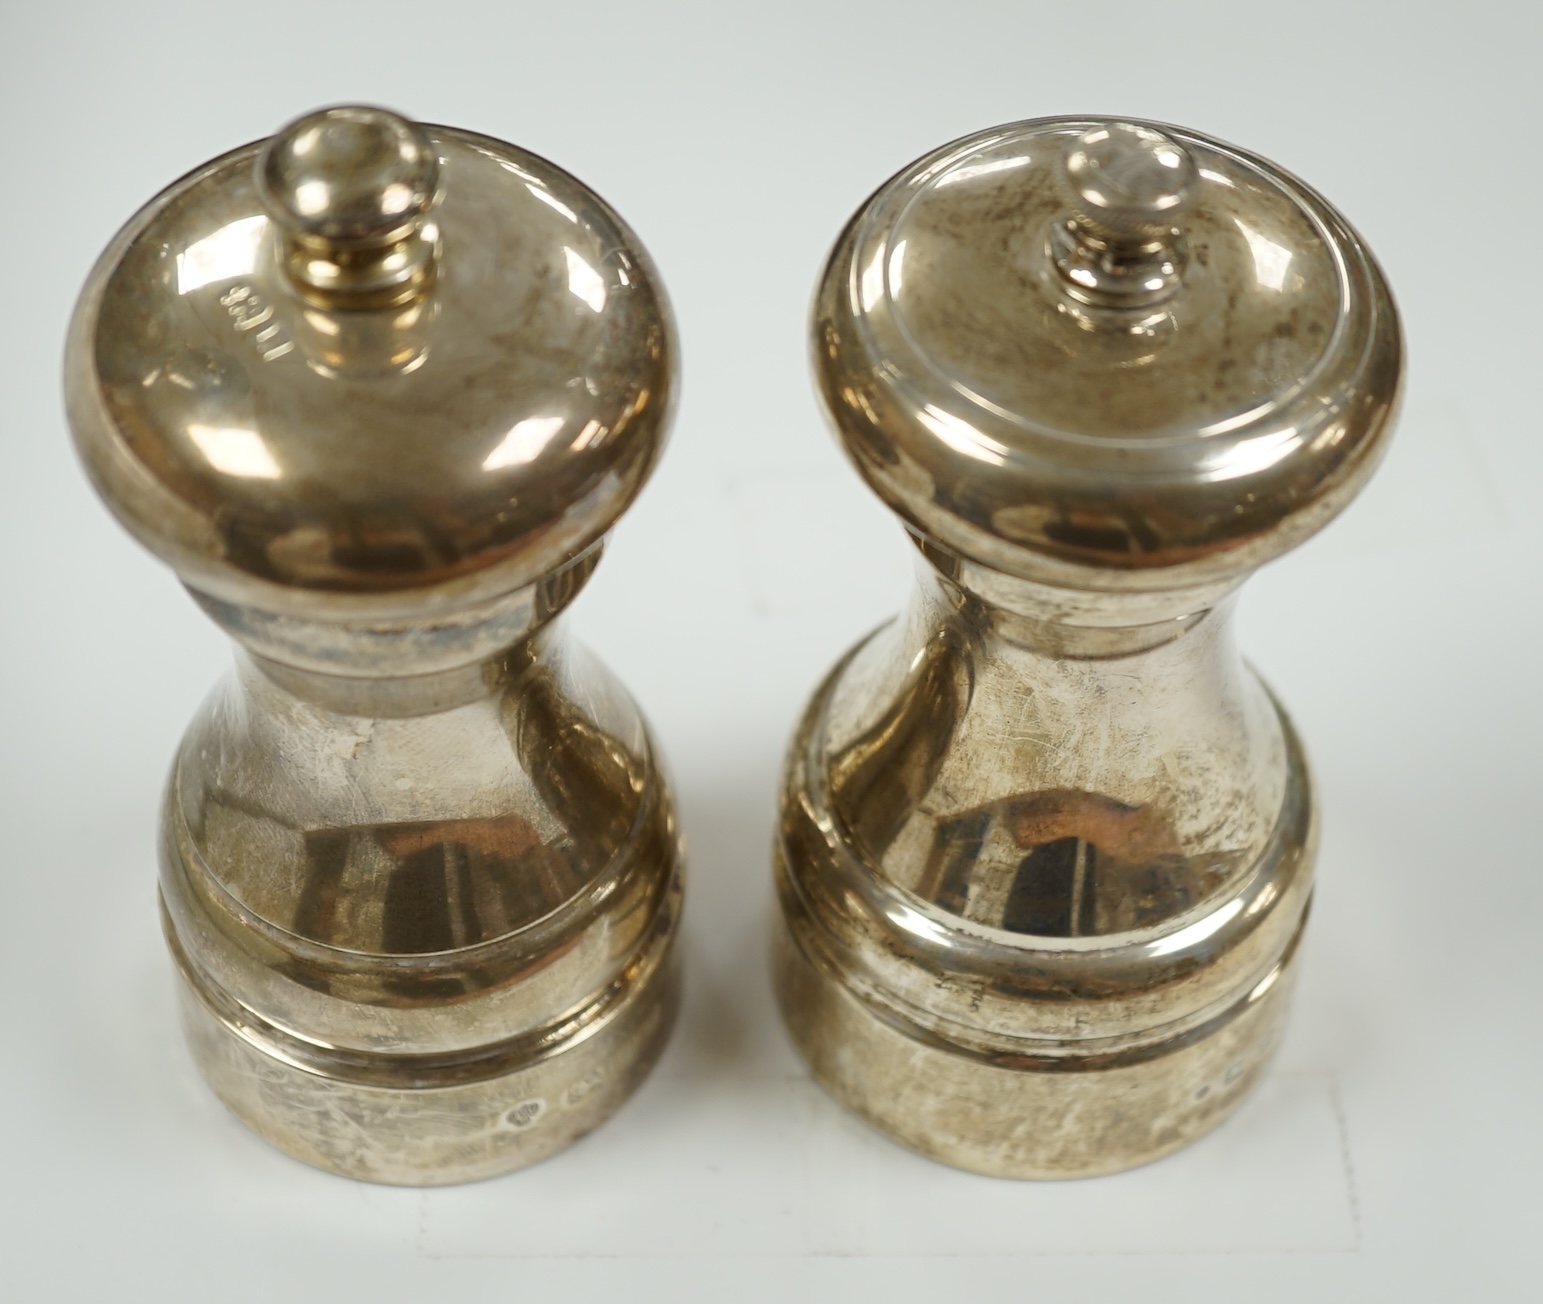 Two modern silver mounted pepper grinders, tallest 10.2cm.